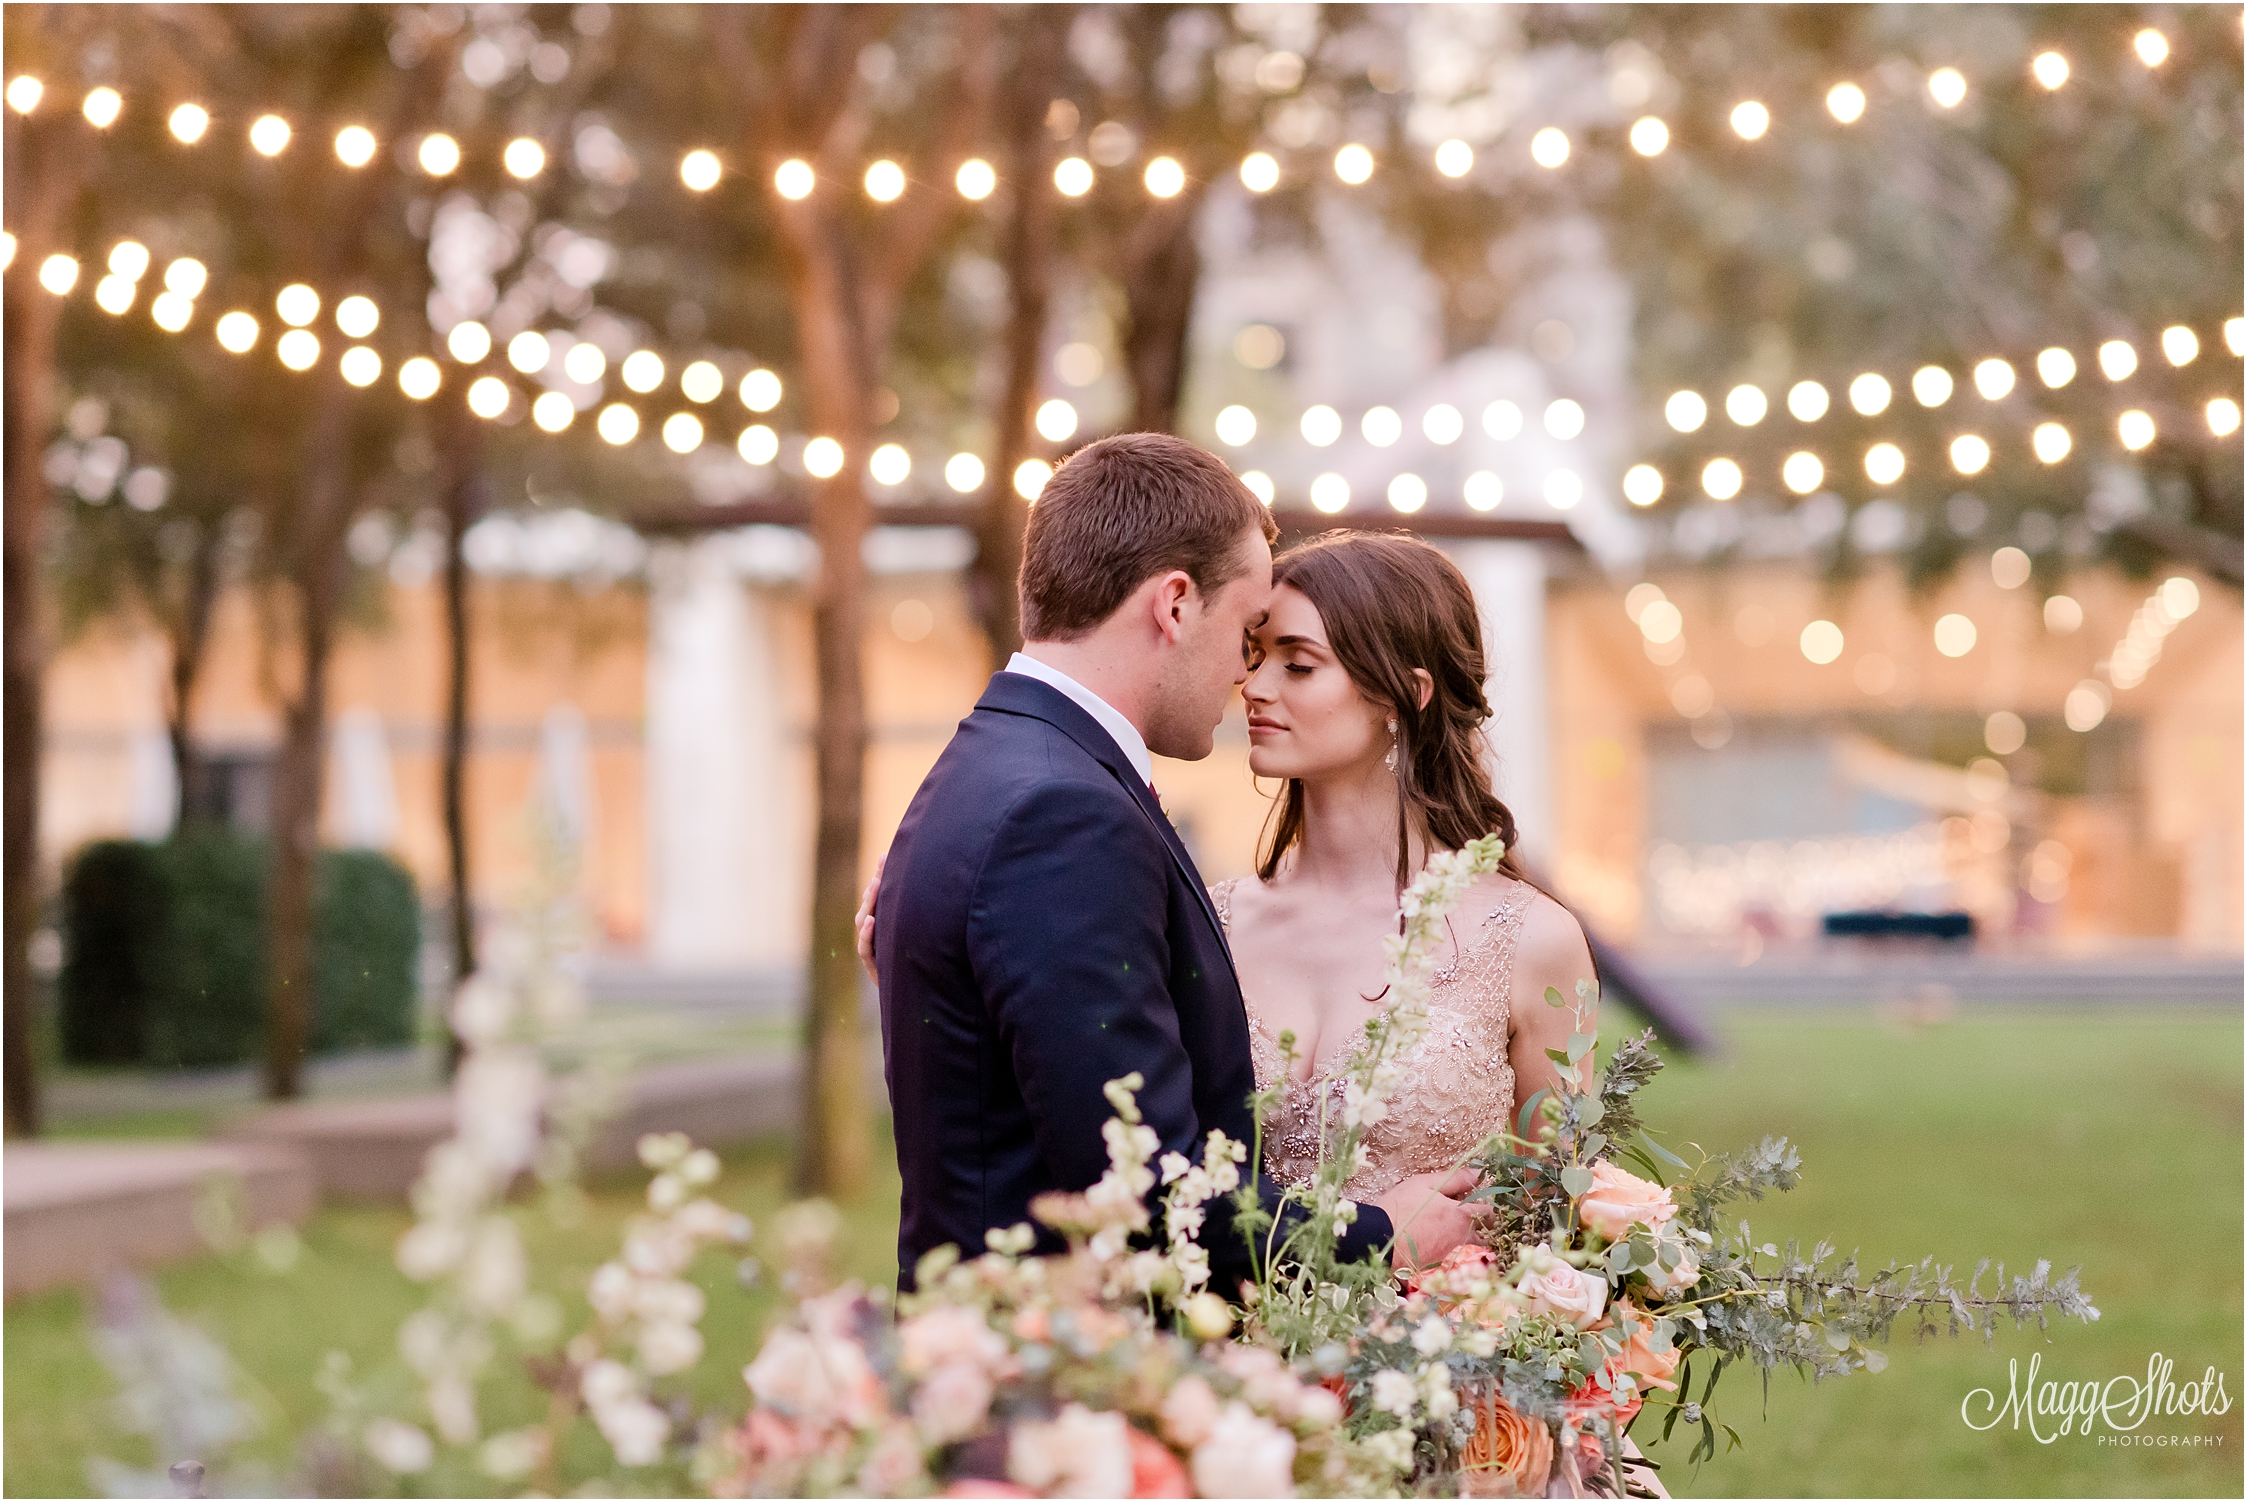 Styled Shoot, Wedding, Love, MaggShots Photography, MaggShots, Professional Photography, Professional Photographer, Couple, Bouquet, Flowers, Ring, The Washer Sculpture Center, Dallas, Lights, Bride and Groom